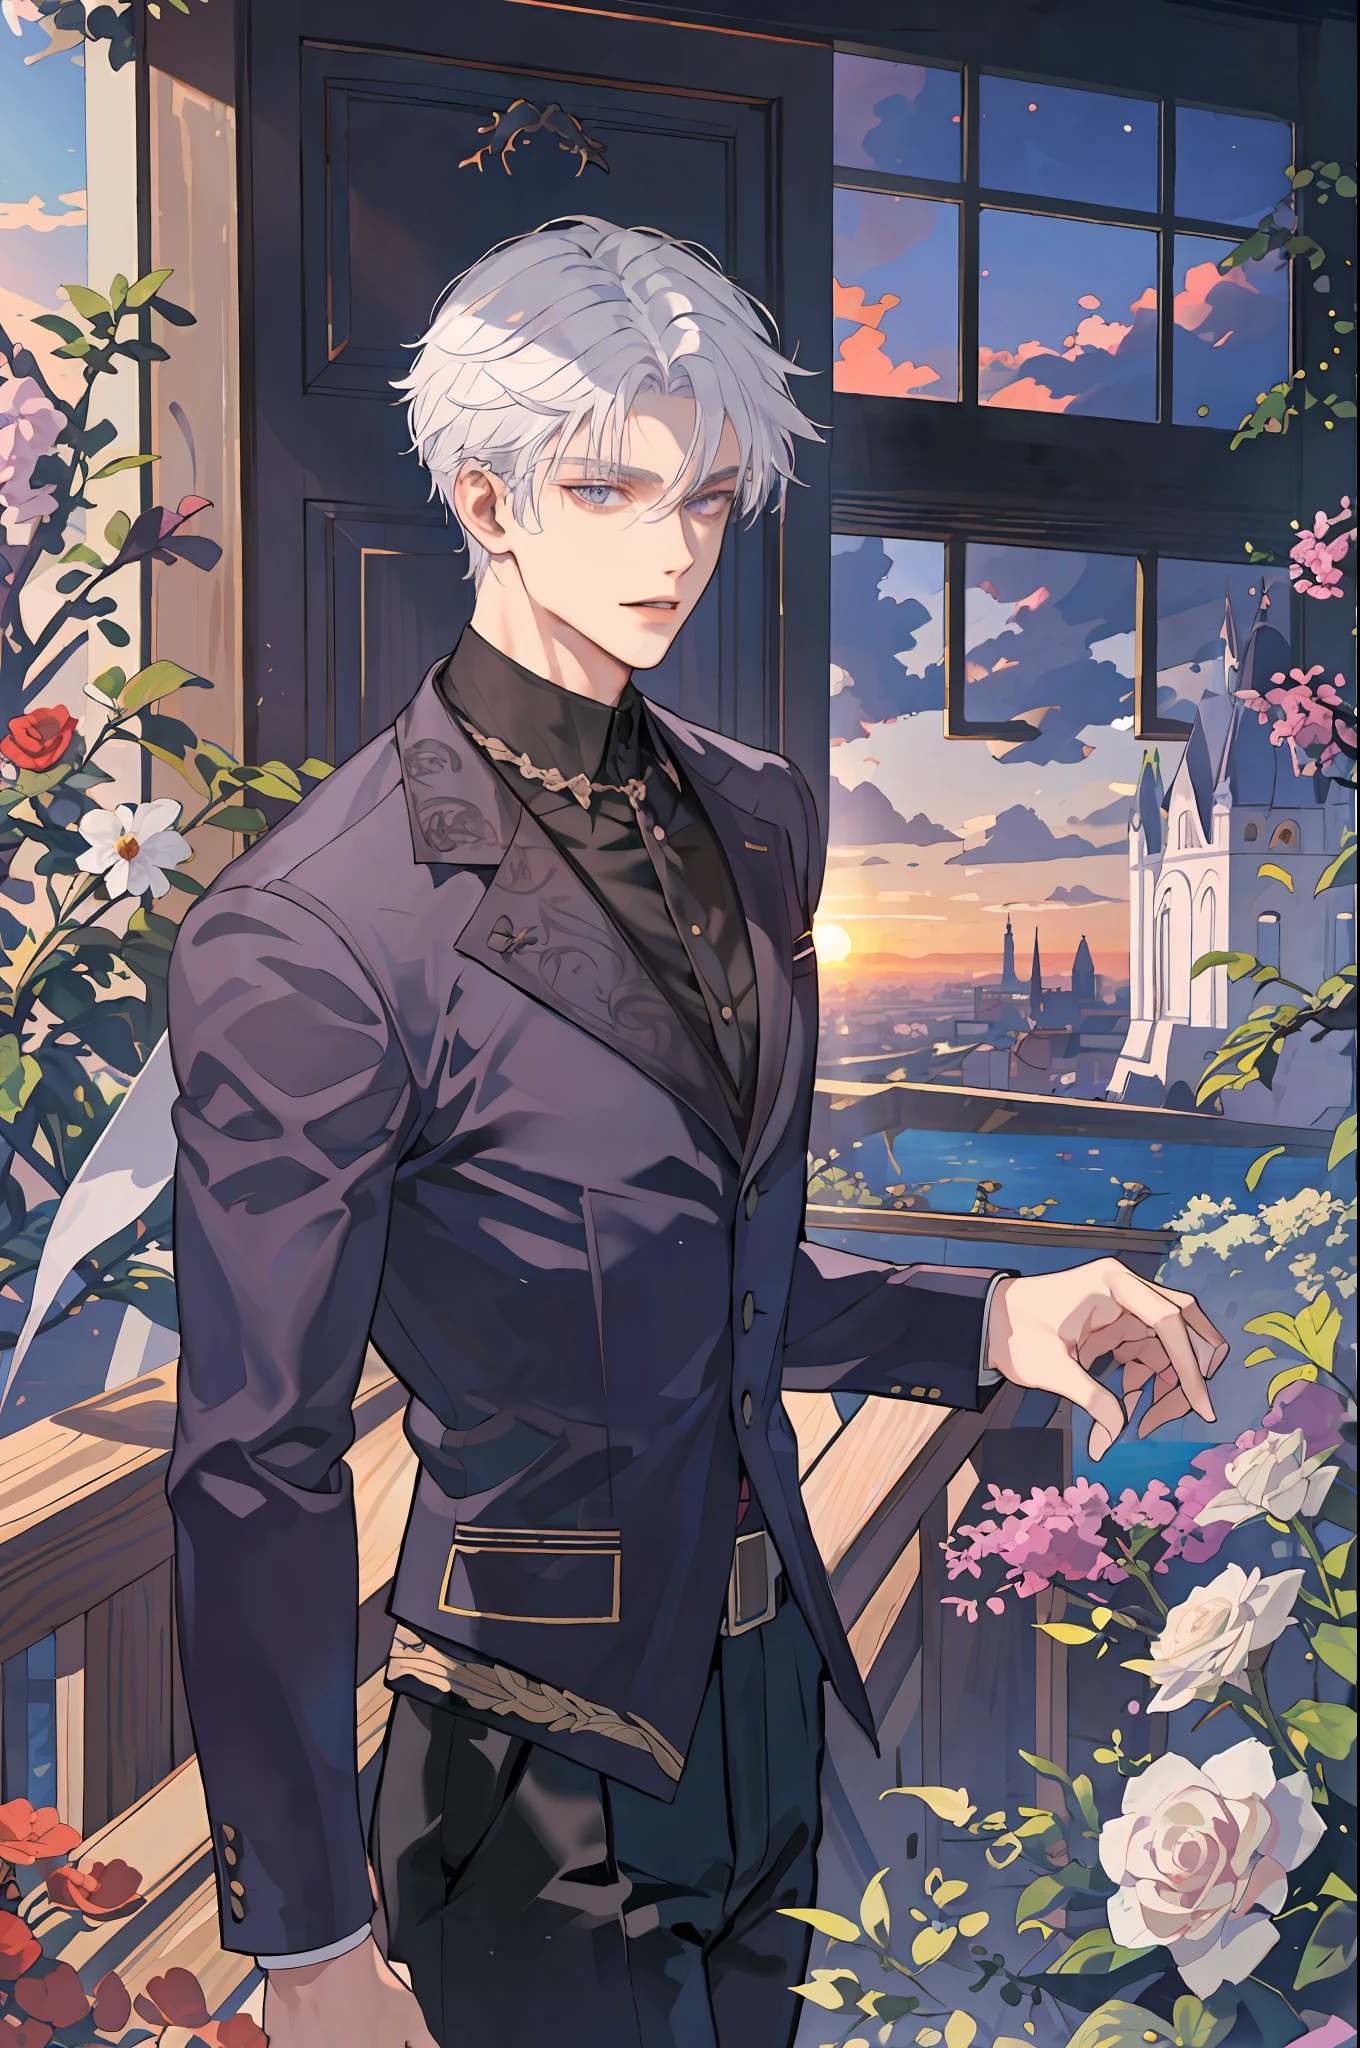 ((Masterpiece:1.2, best quality)), 4K, Adult, Single, Young man, Handsome, Very tall, Muscle, Wide shoulders,White hair, Purple eyes, Portrait, Sunset, Garden